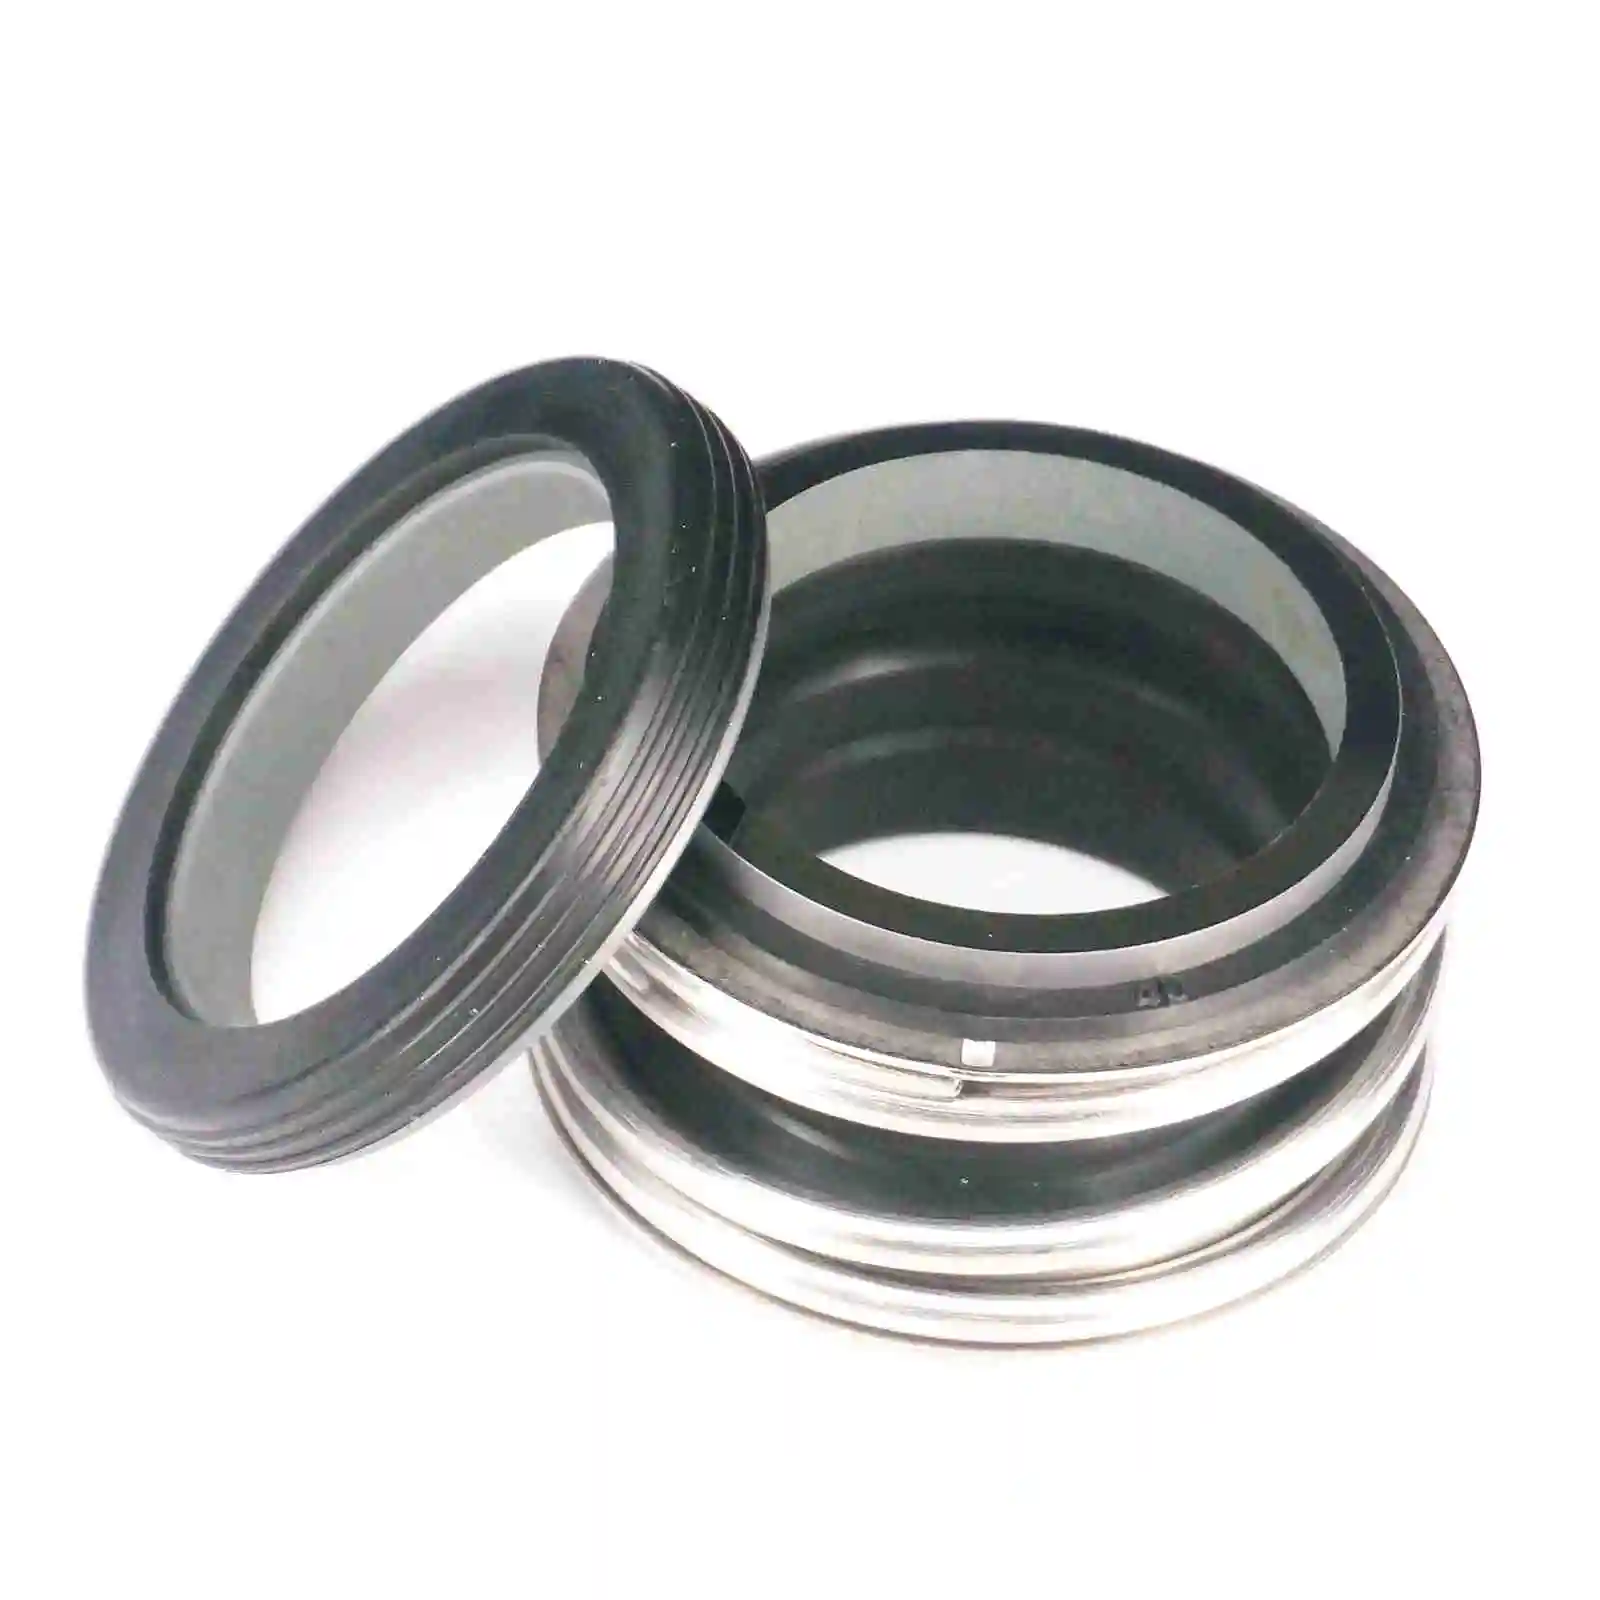 12-30mm Water Pump Mechanical Shaft Seal Single Coil Spring for In-line pump